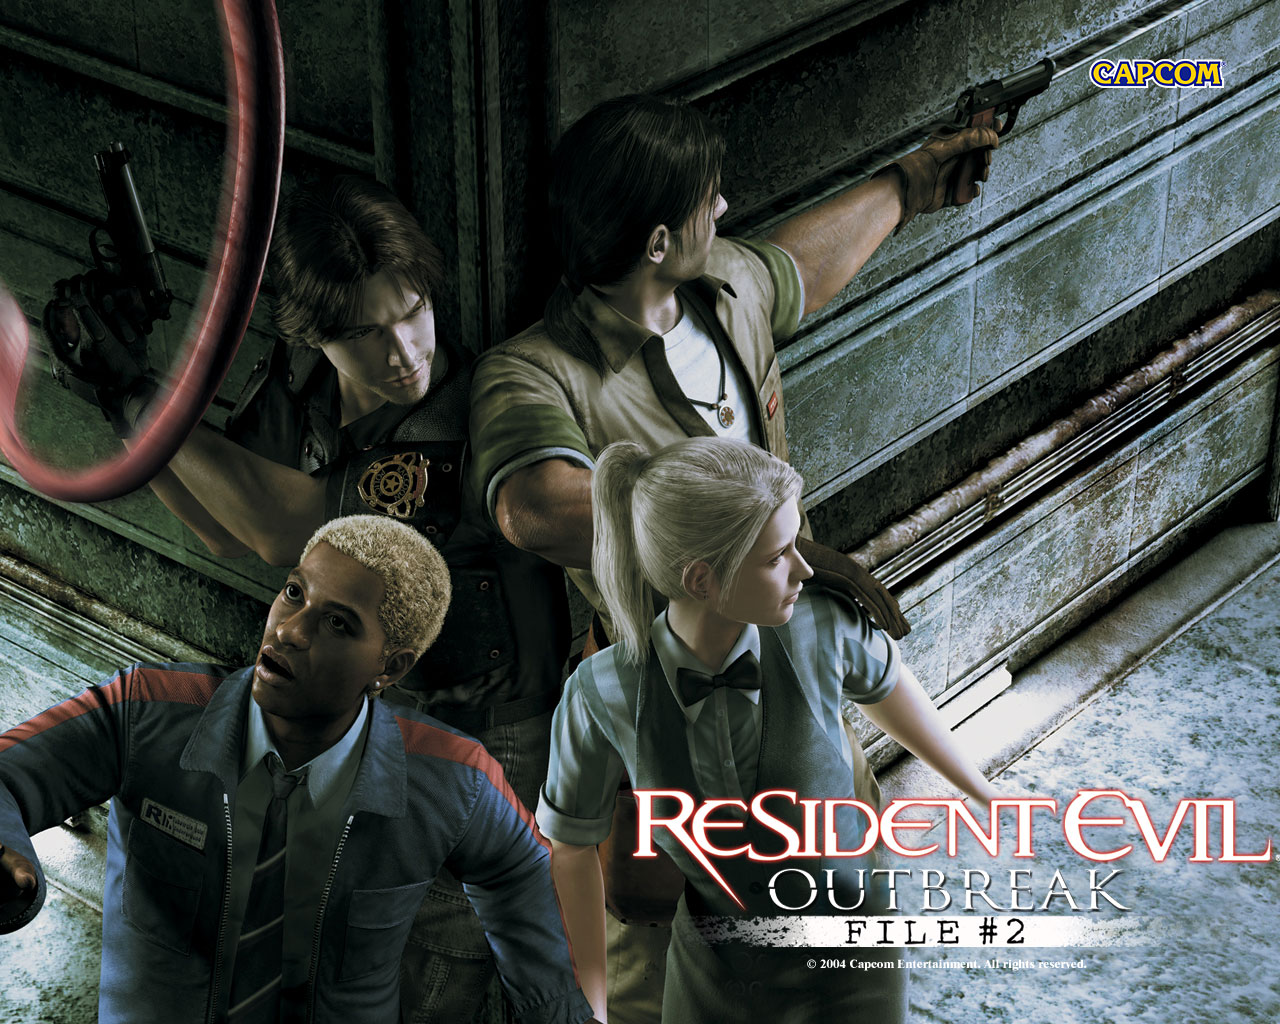 Every Mainline Resident Evil Game, Ranked Easiest To Hardest